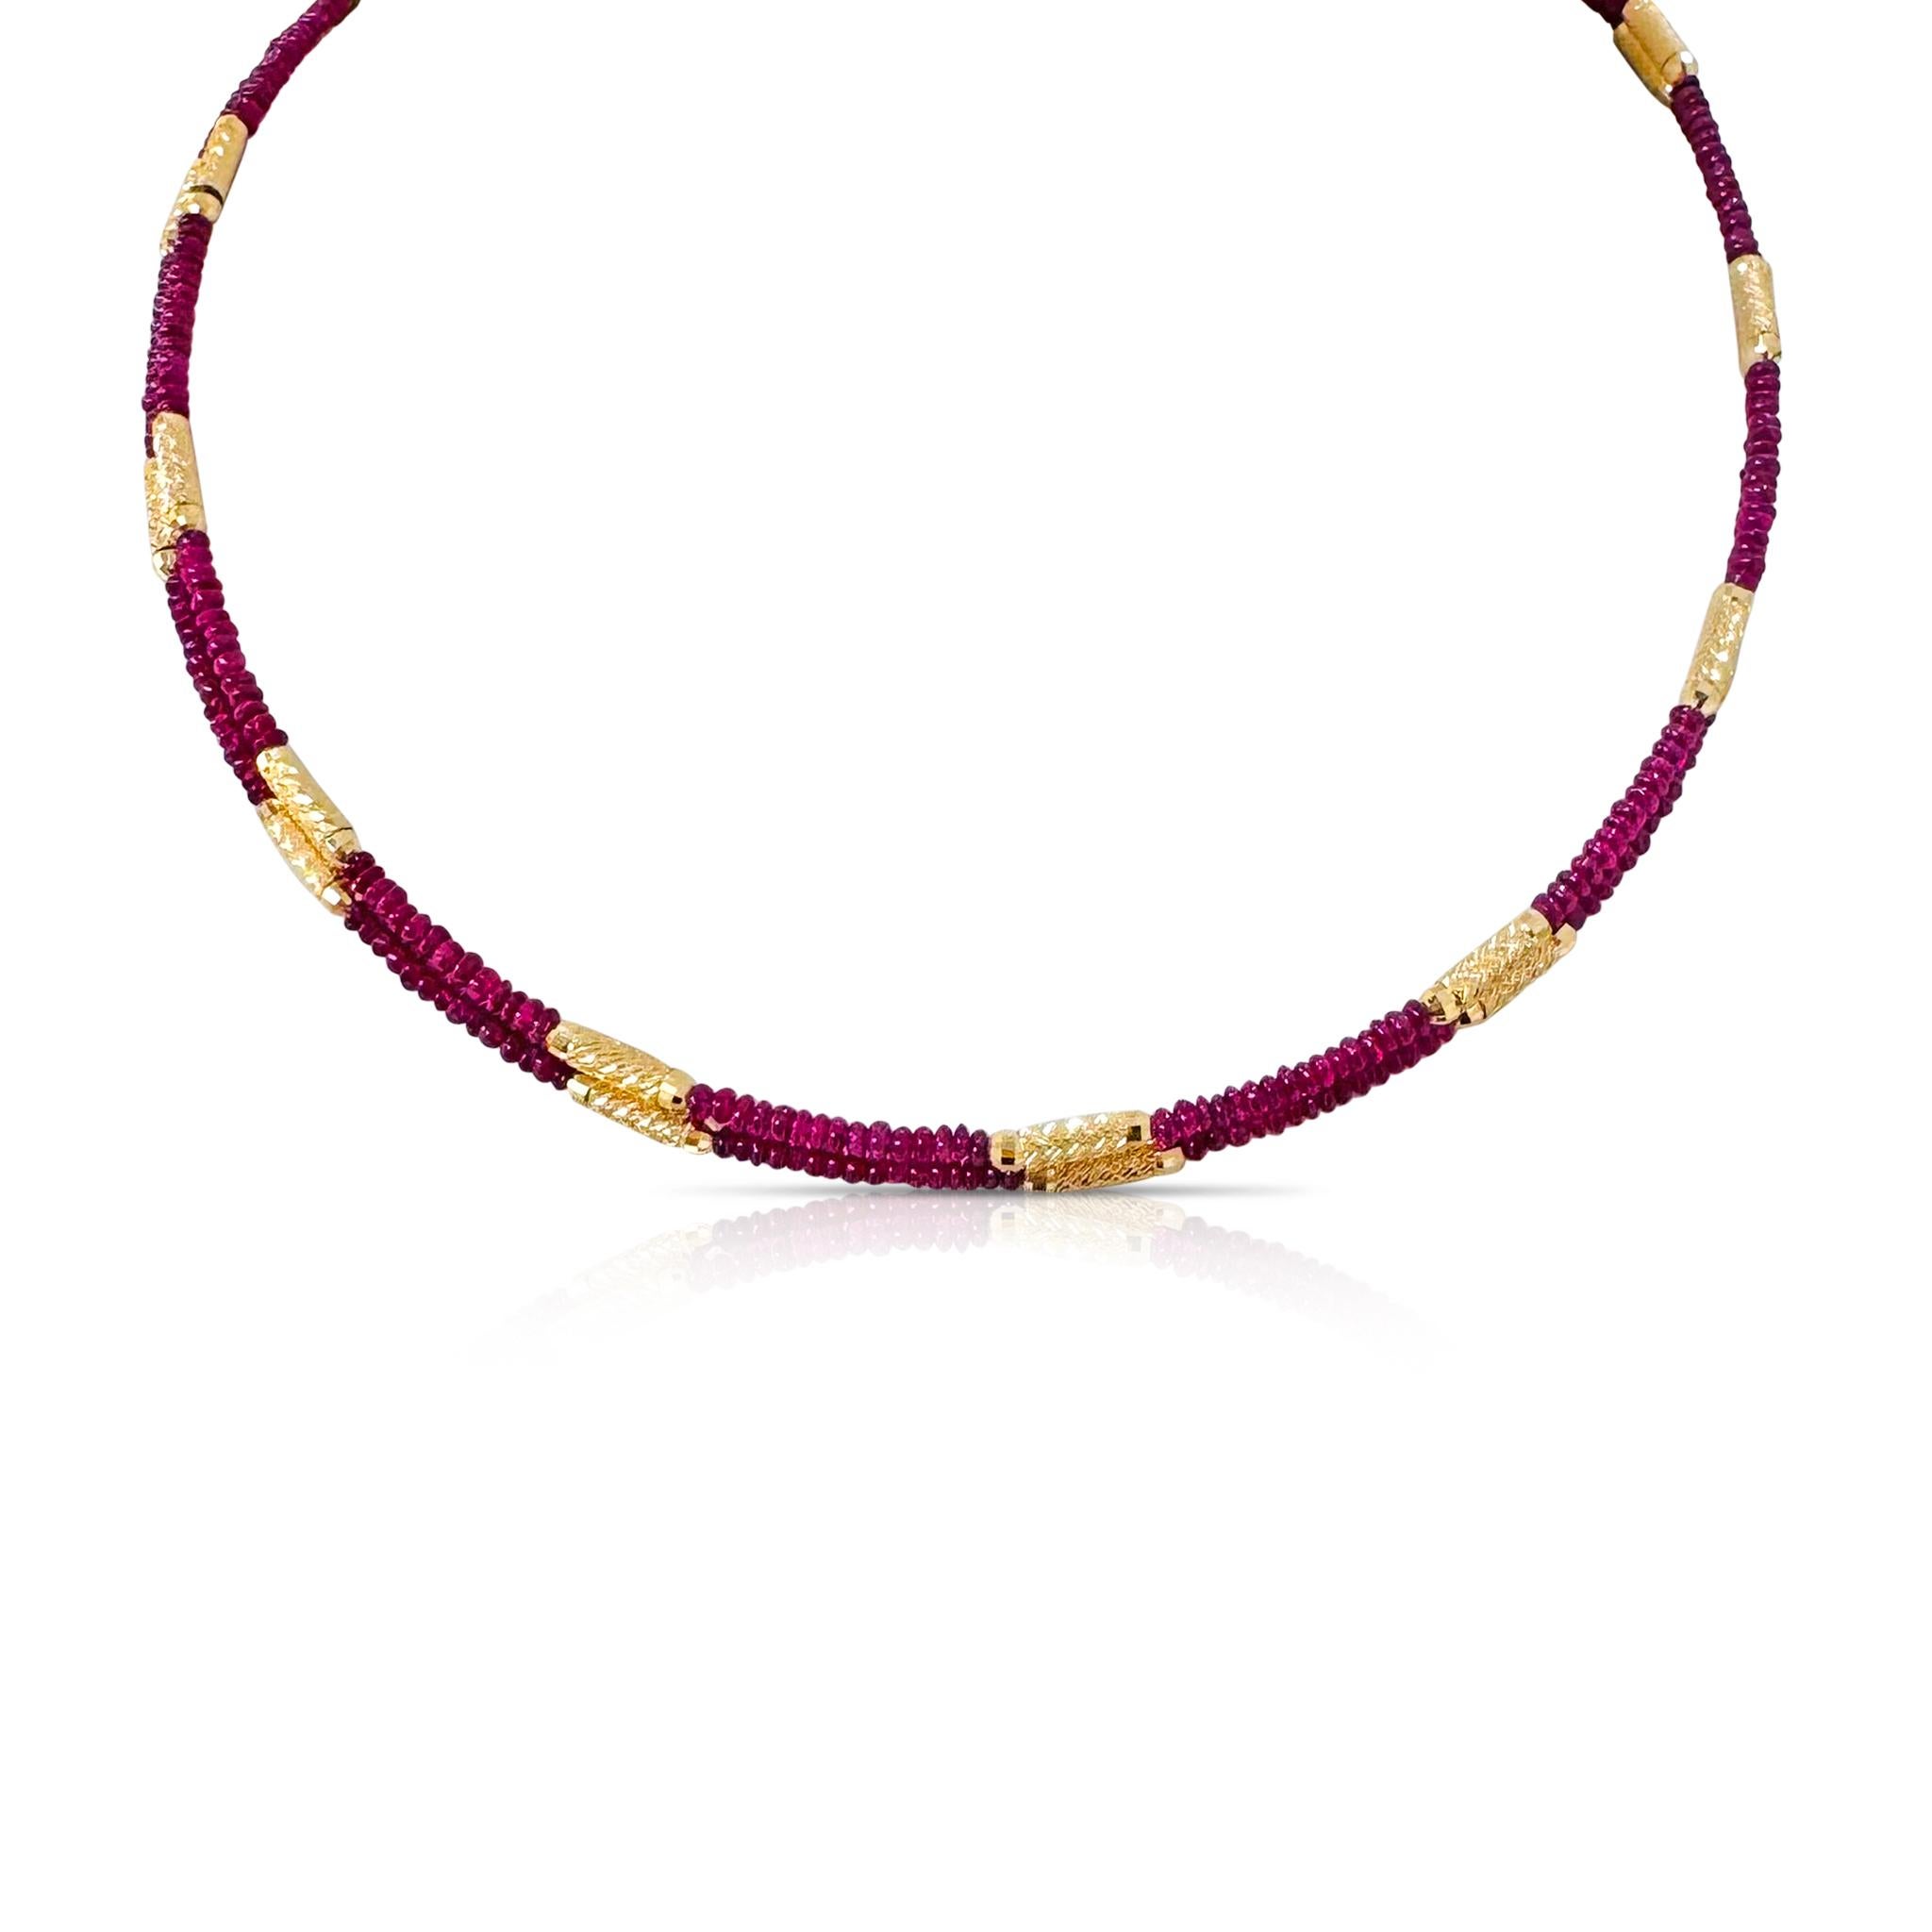 Ruby Beads & Magnet Necklace In 18K Yellow Gold In New Condition For Sale In Coral Gables, FL